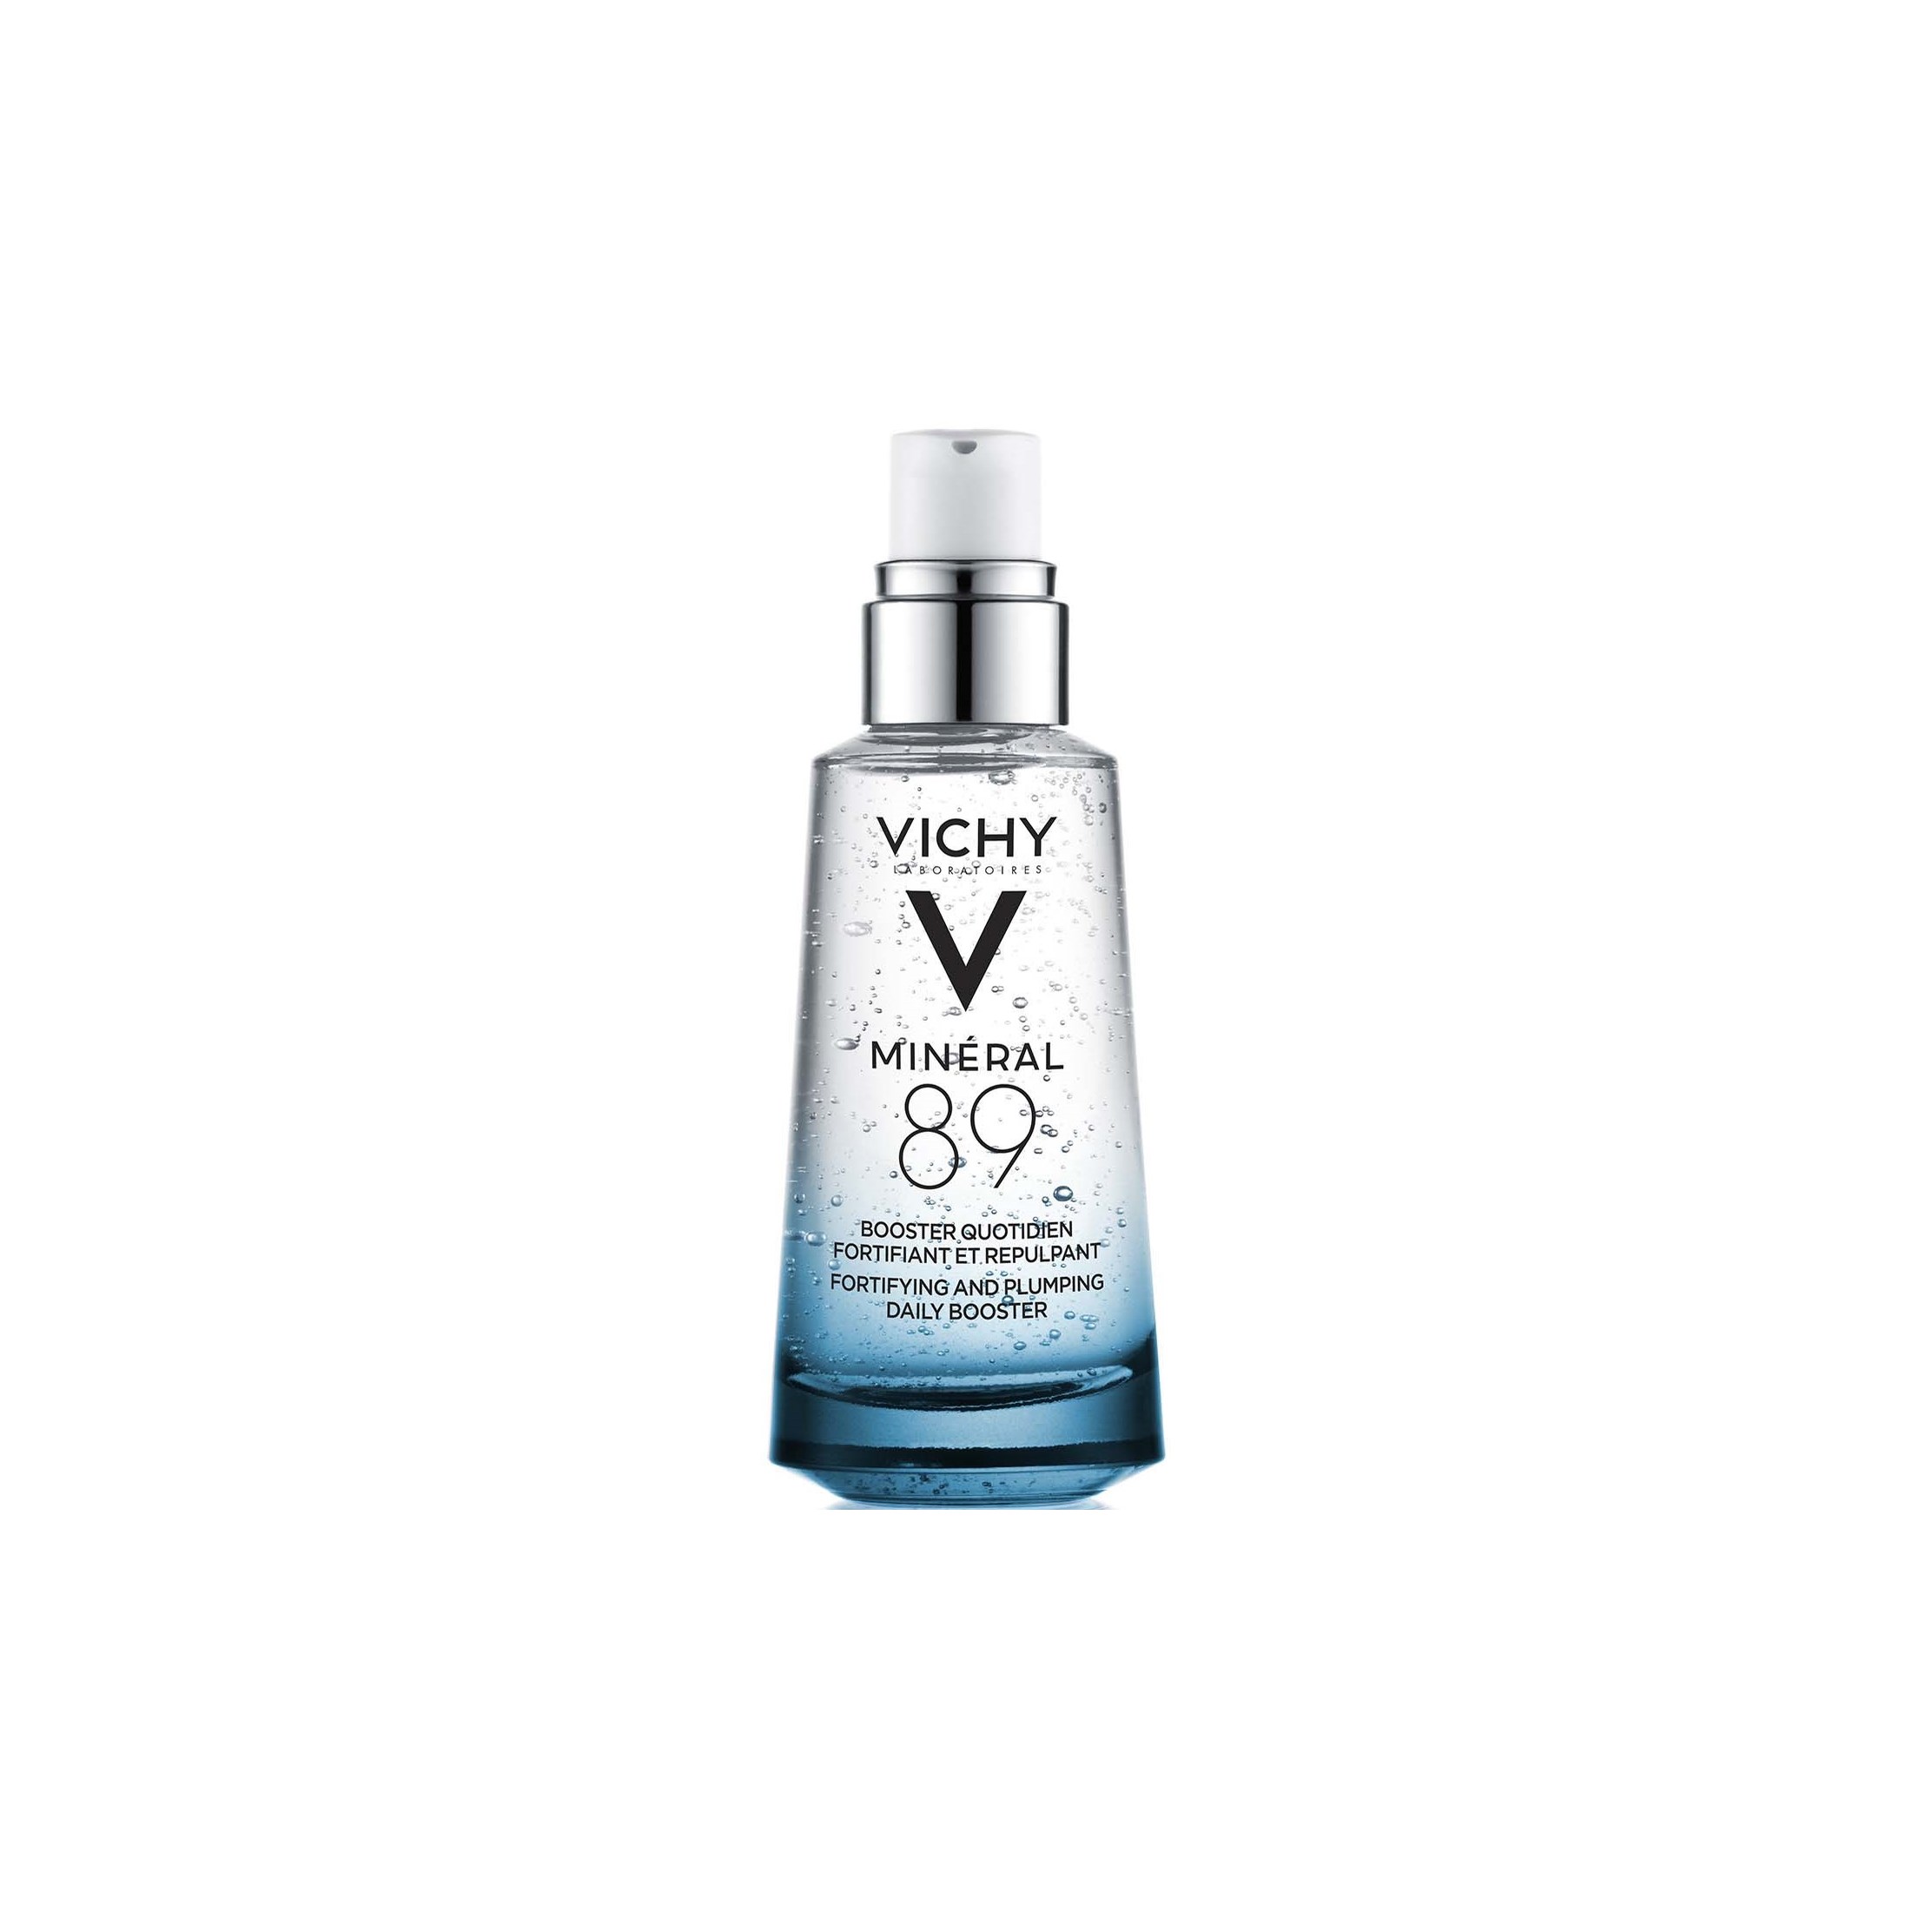 Bilde av Vichy Minéral 89 Fortifying And Plumping Daily Booster 50 Ml